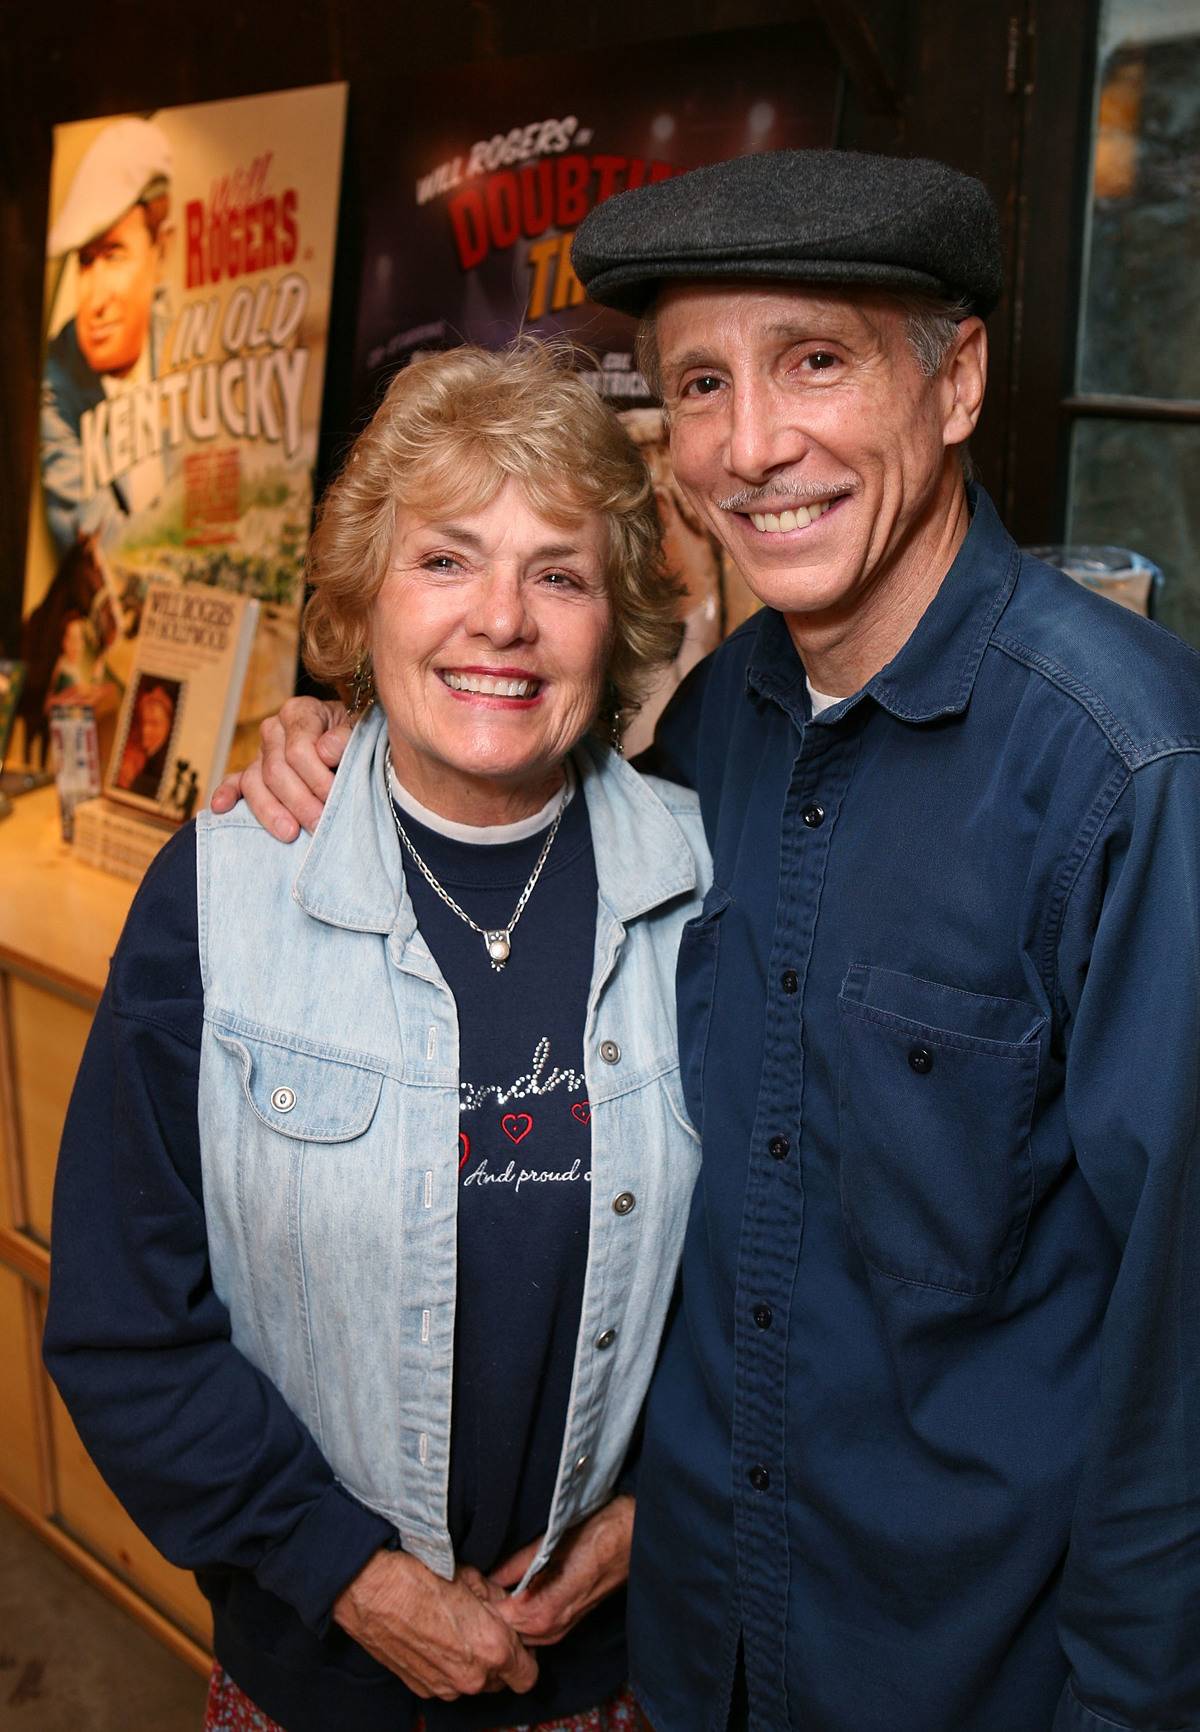 <p>Johnny Crawford had a bright career after his time as a child star. In the late '50s and early '60s, he had a hit recording career and was a top teen favorite performer of the time, with four Billboard Top-40 hits.</p> <p>He went on to act in many other films and television shows over the years. In 1992, Crawford led a California-based vintage dance orchestra called JCO (Johnny Crawford Orchestra). Sadly, he passed away in 2021. </p>